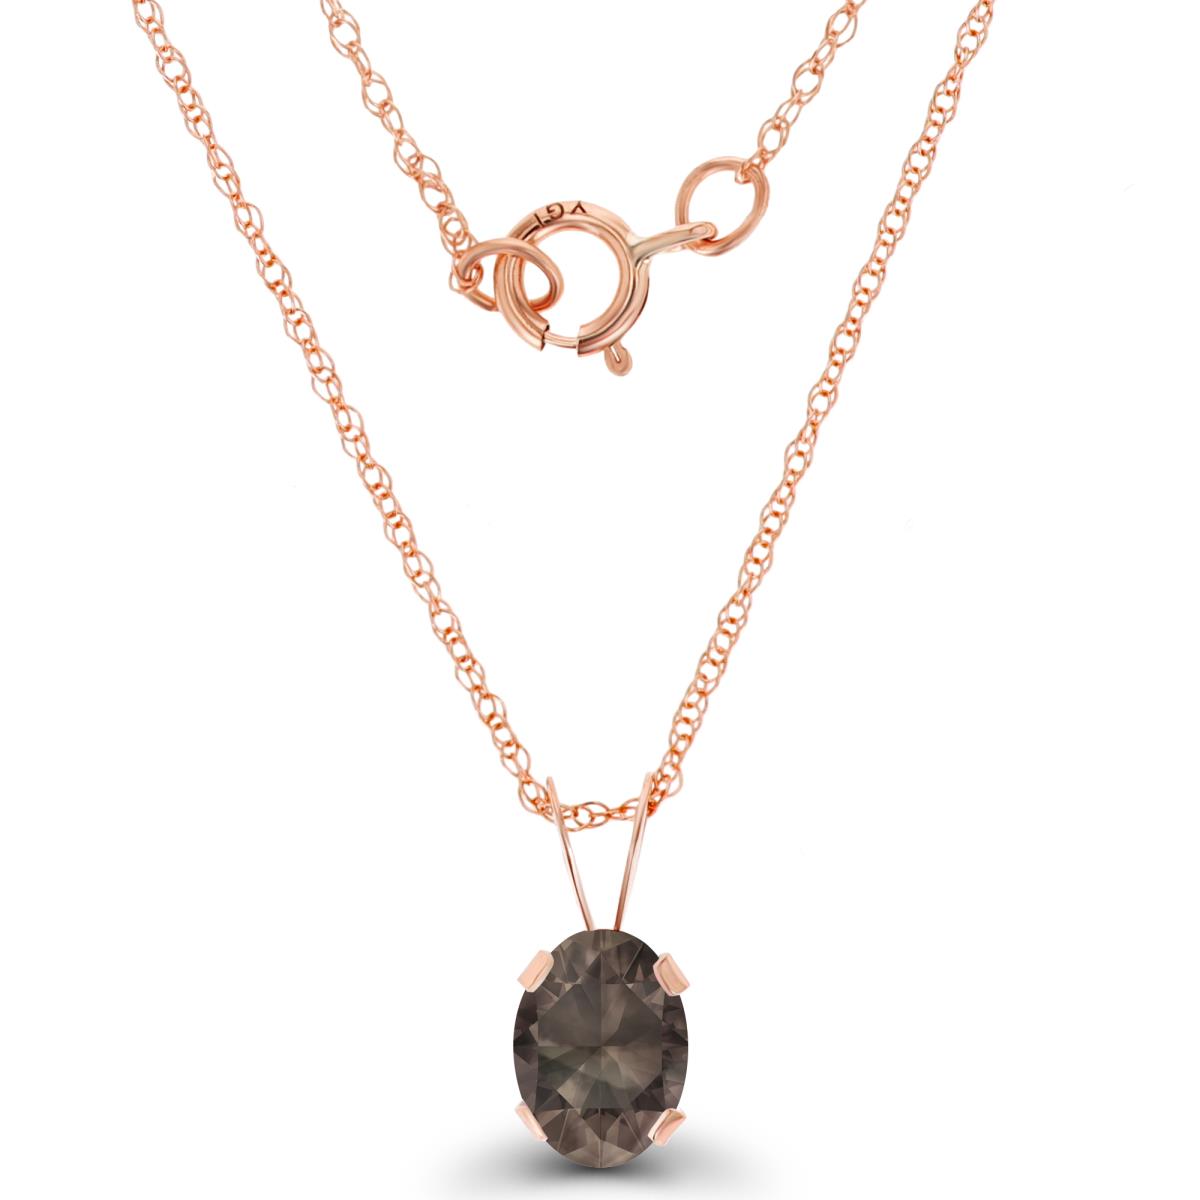 14K Rose Gold 7x5mm Oval Smokey Quartz 18" Rope Chain Necklace